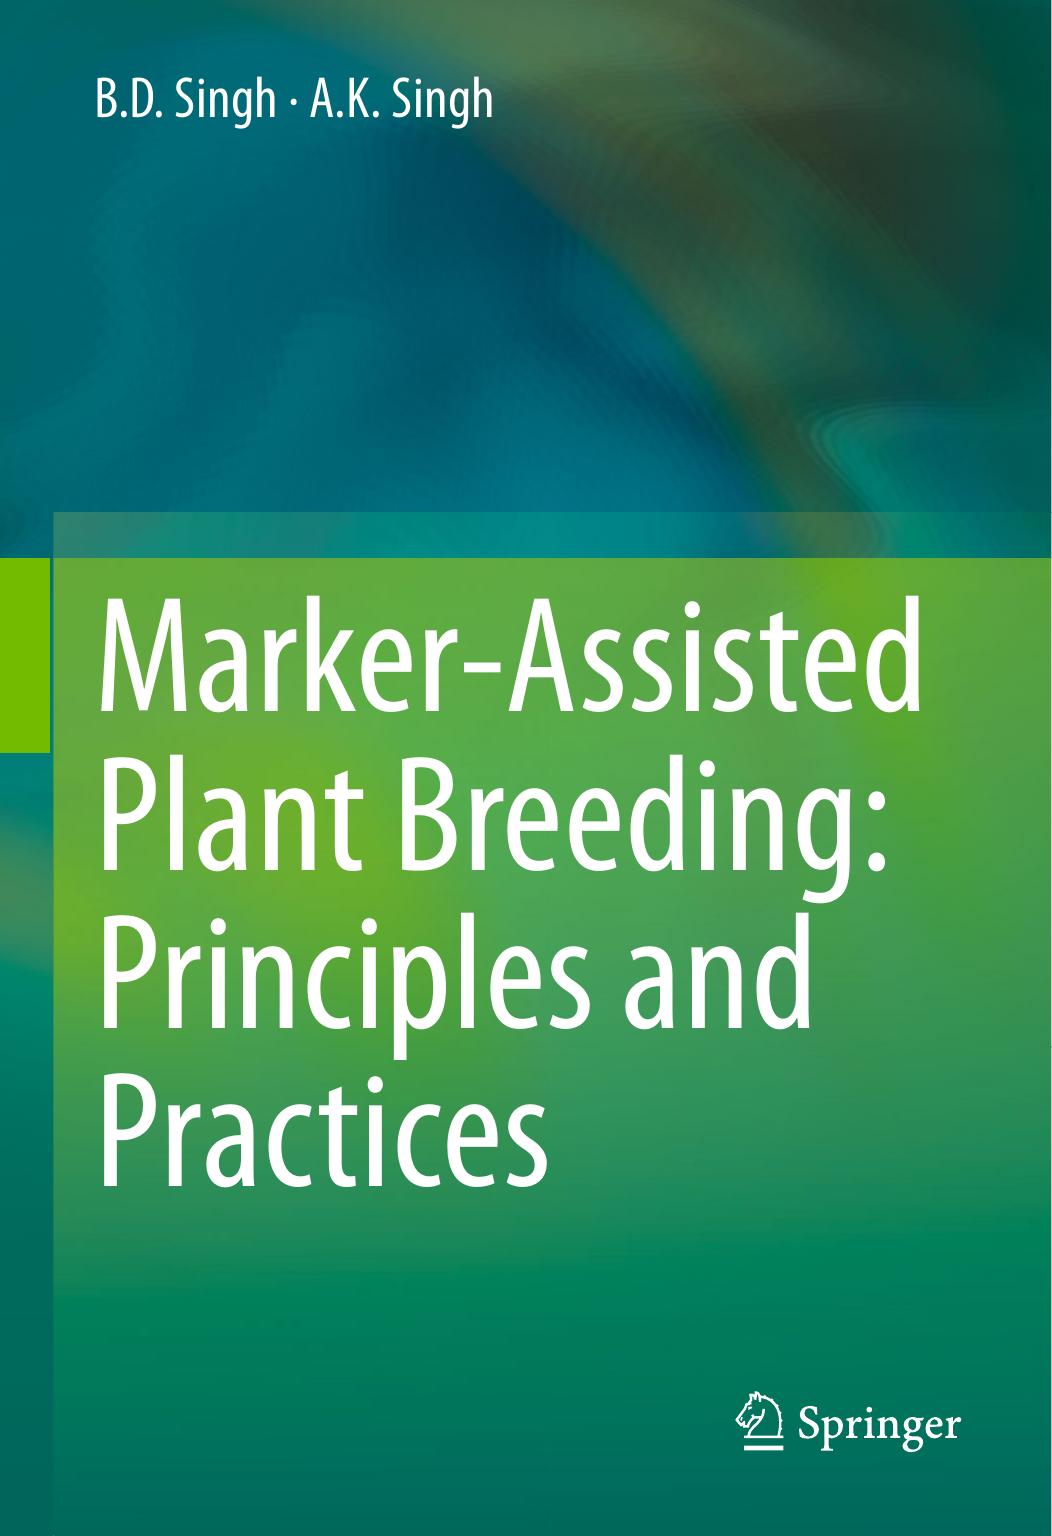 Marker-Assisted Plant Breeding  Principles and Practices, 2015